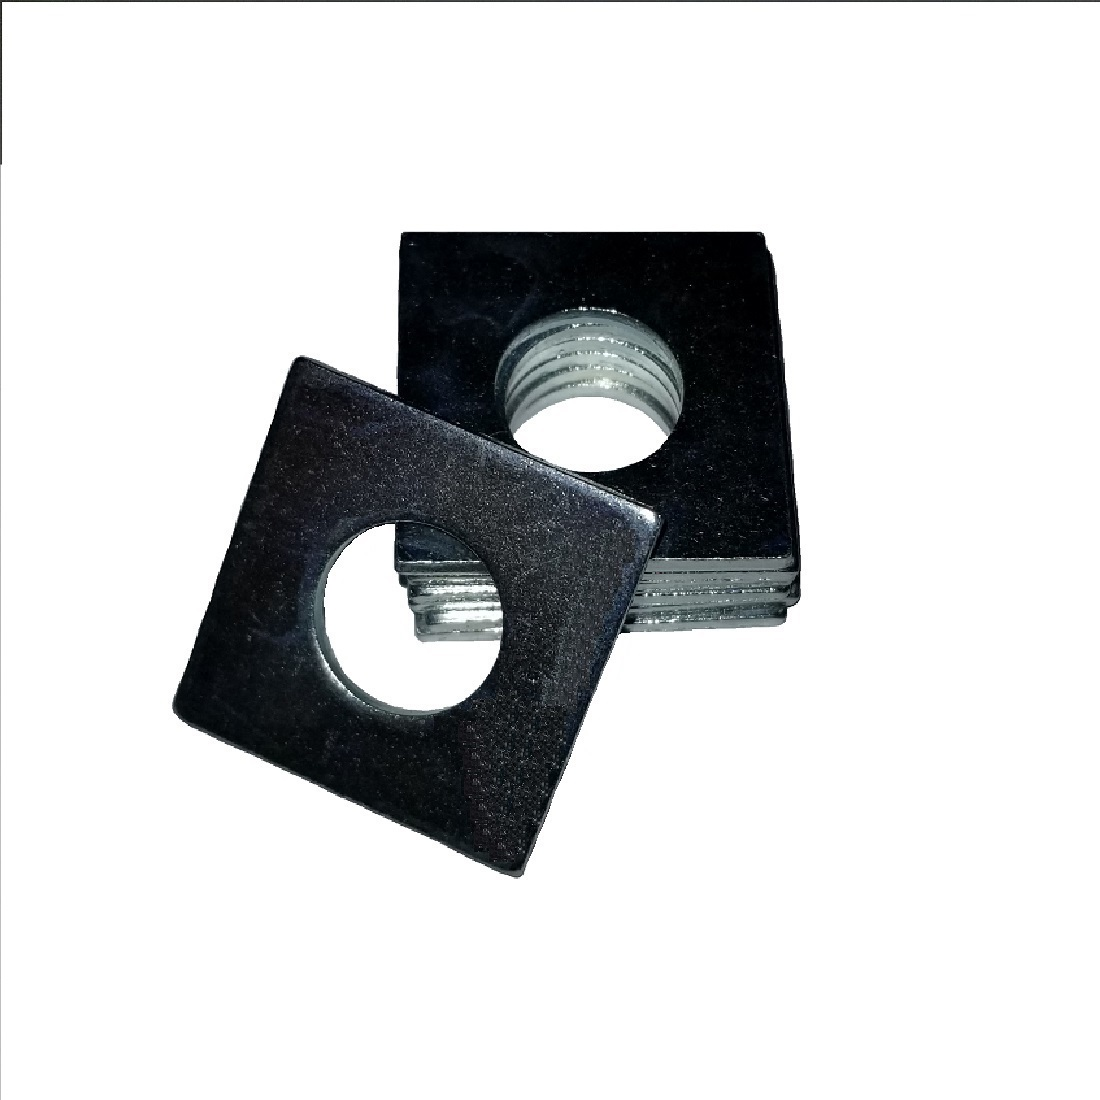 Square OD Washer - 0.515 ID, 2.000 OD, 0.250 Thick, Low Carbon Steel - Soft